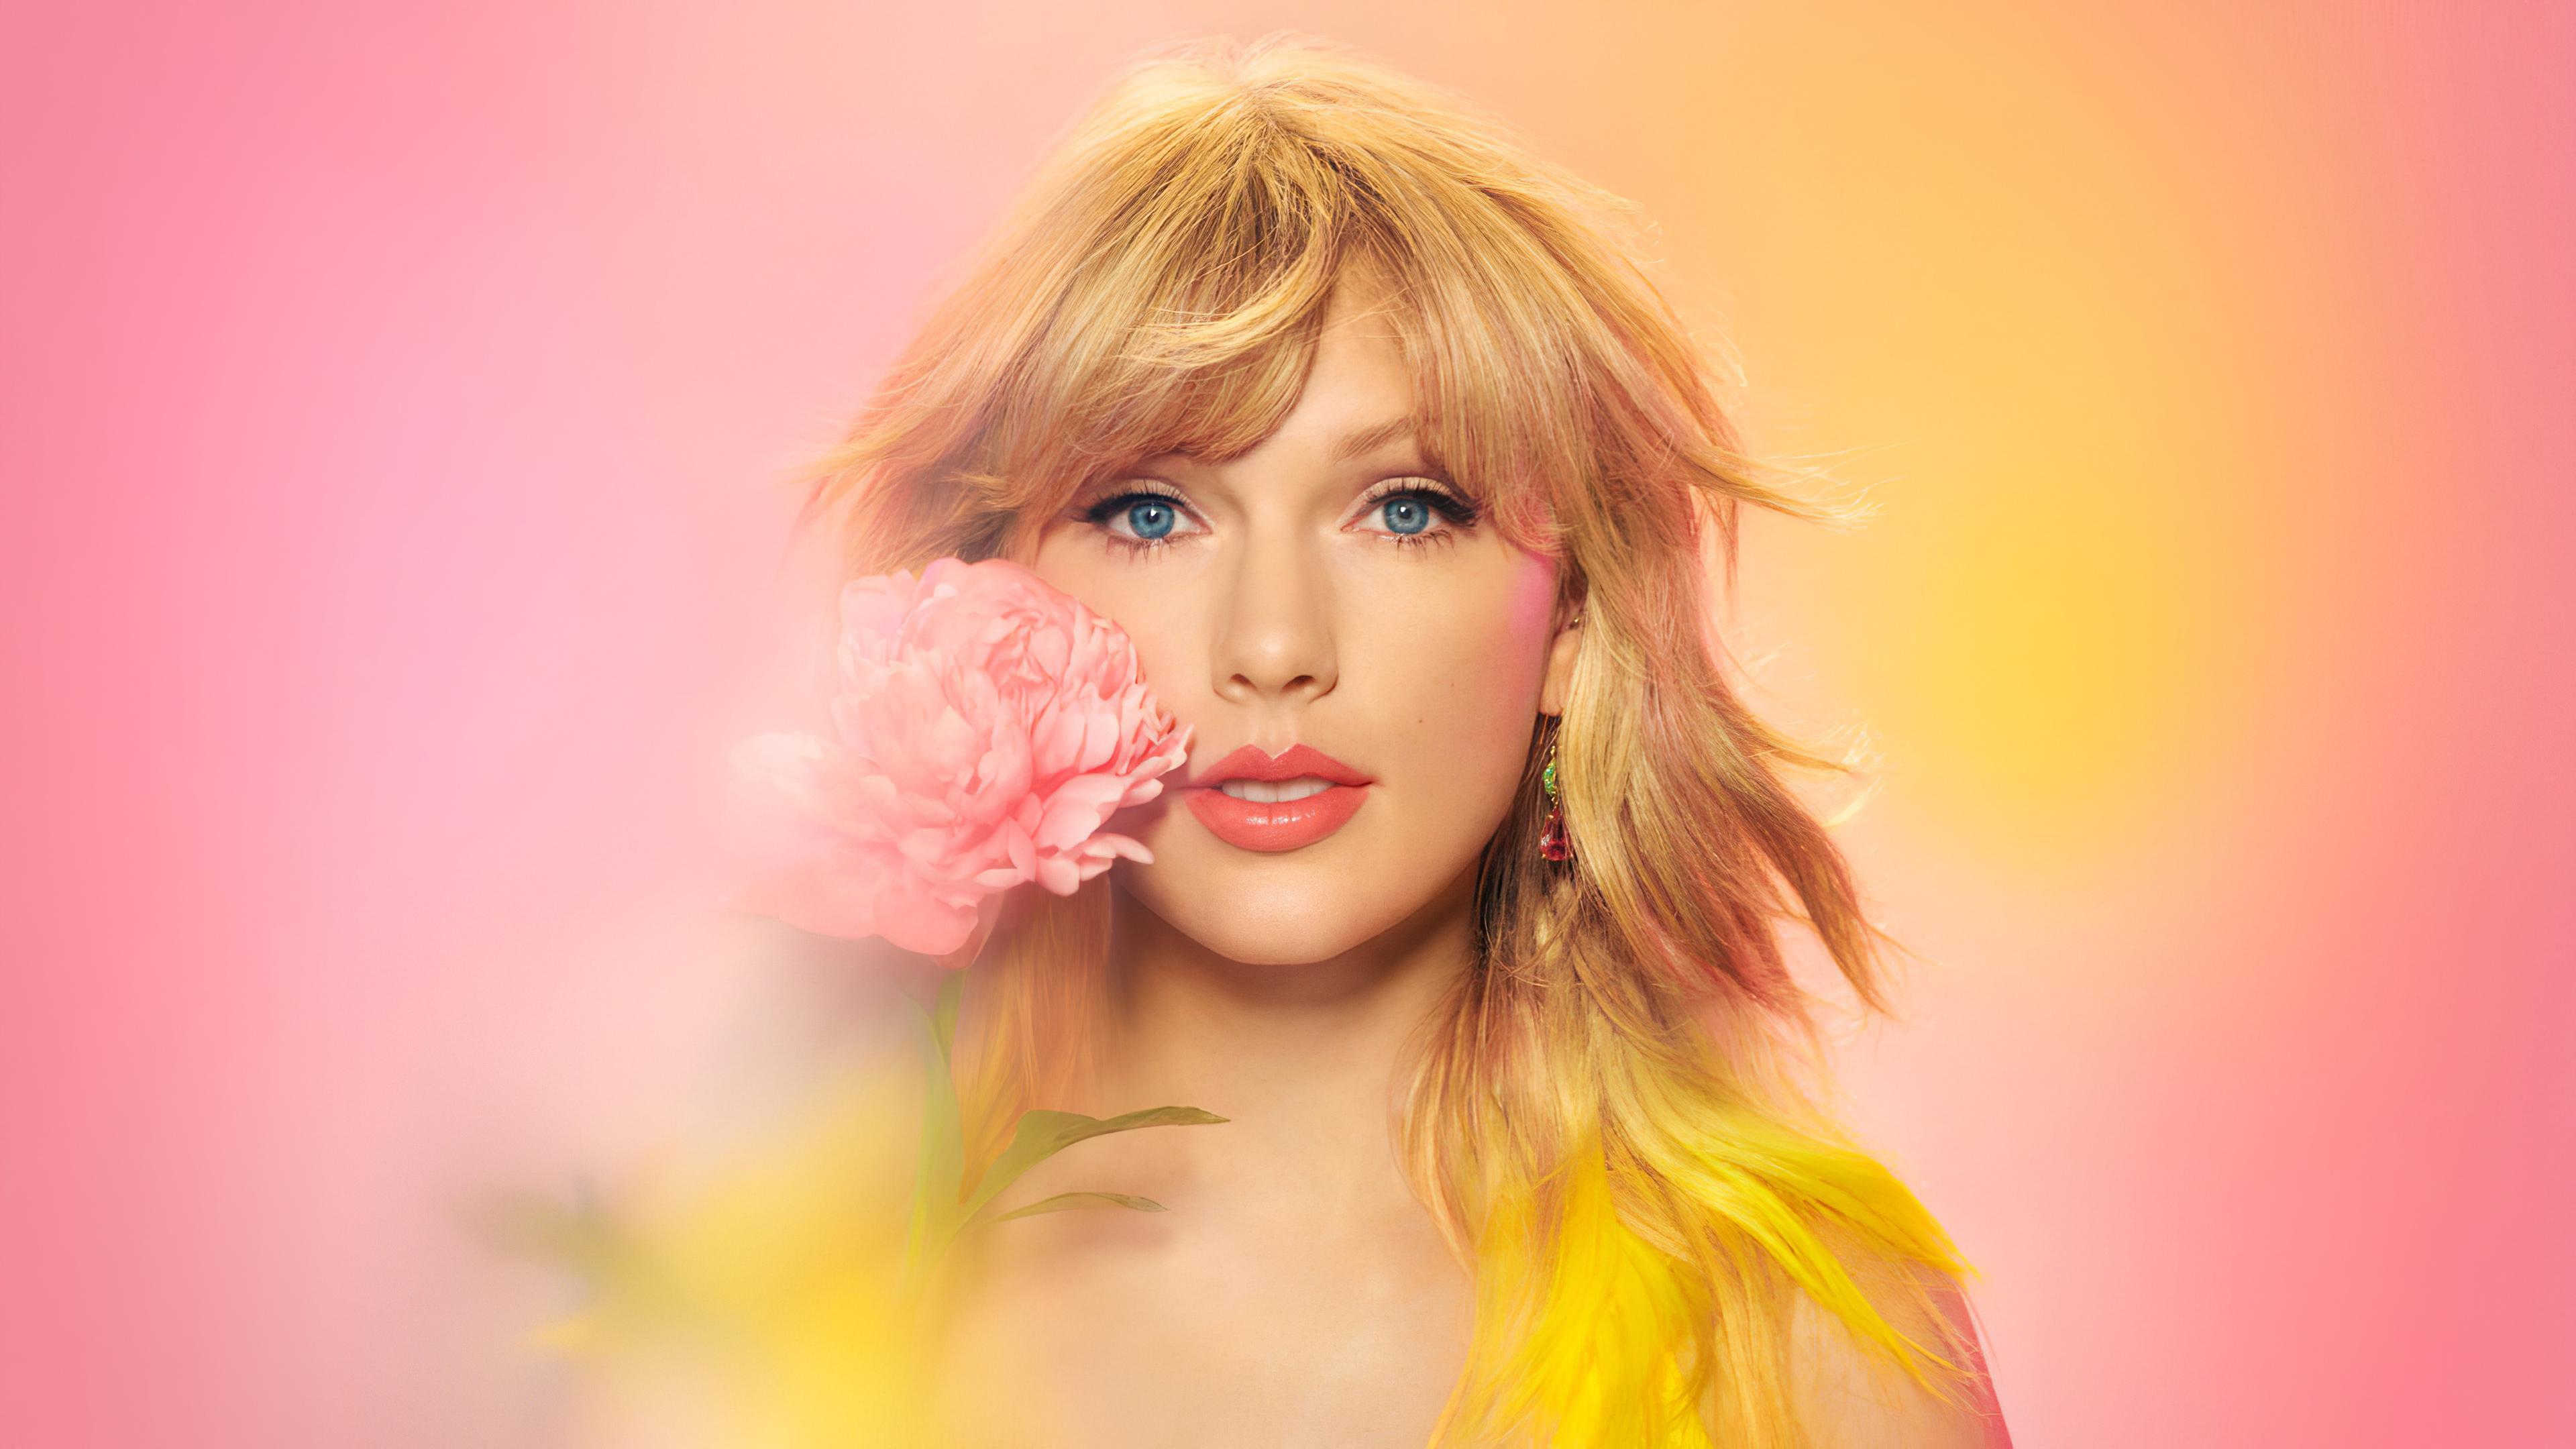 Taylor Swift 4k Wallpapers Wallpaper Cave